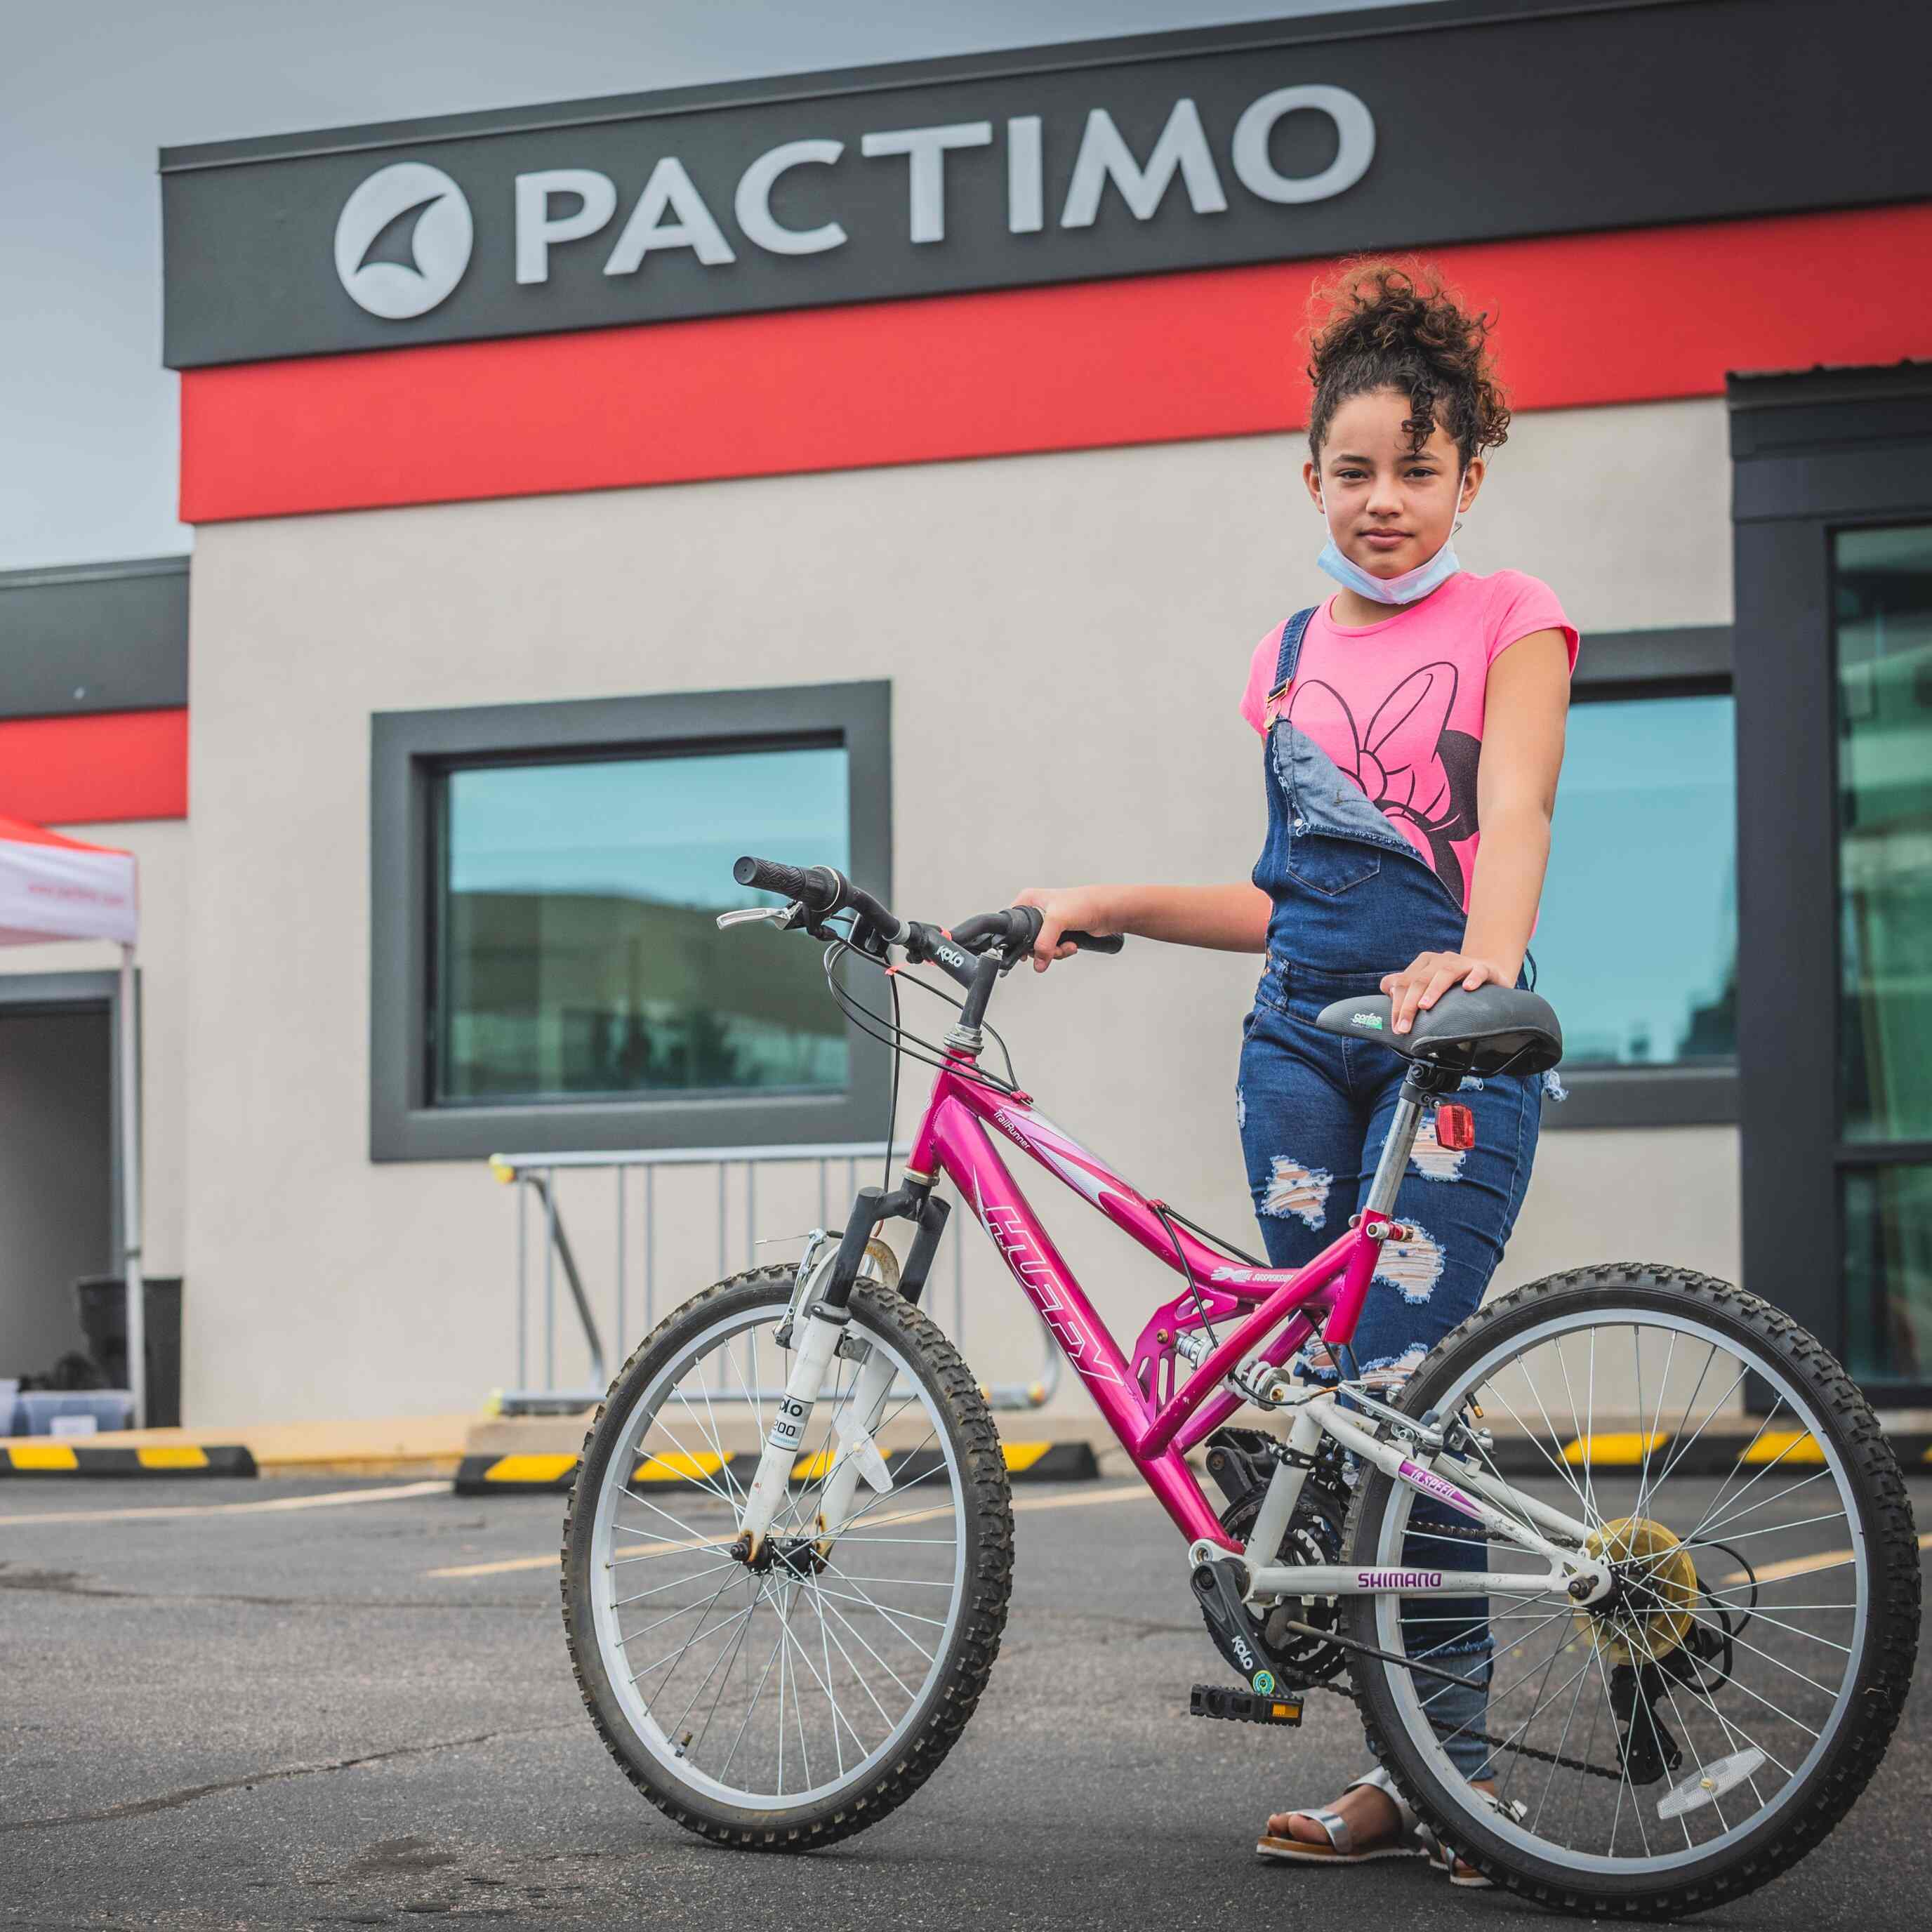 Pactimo Cycling Clothing Impacting Our Community